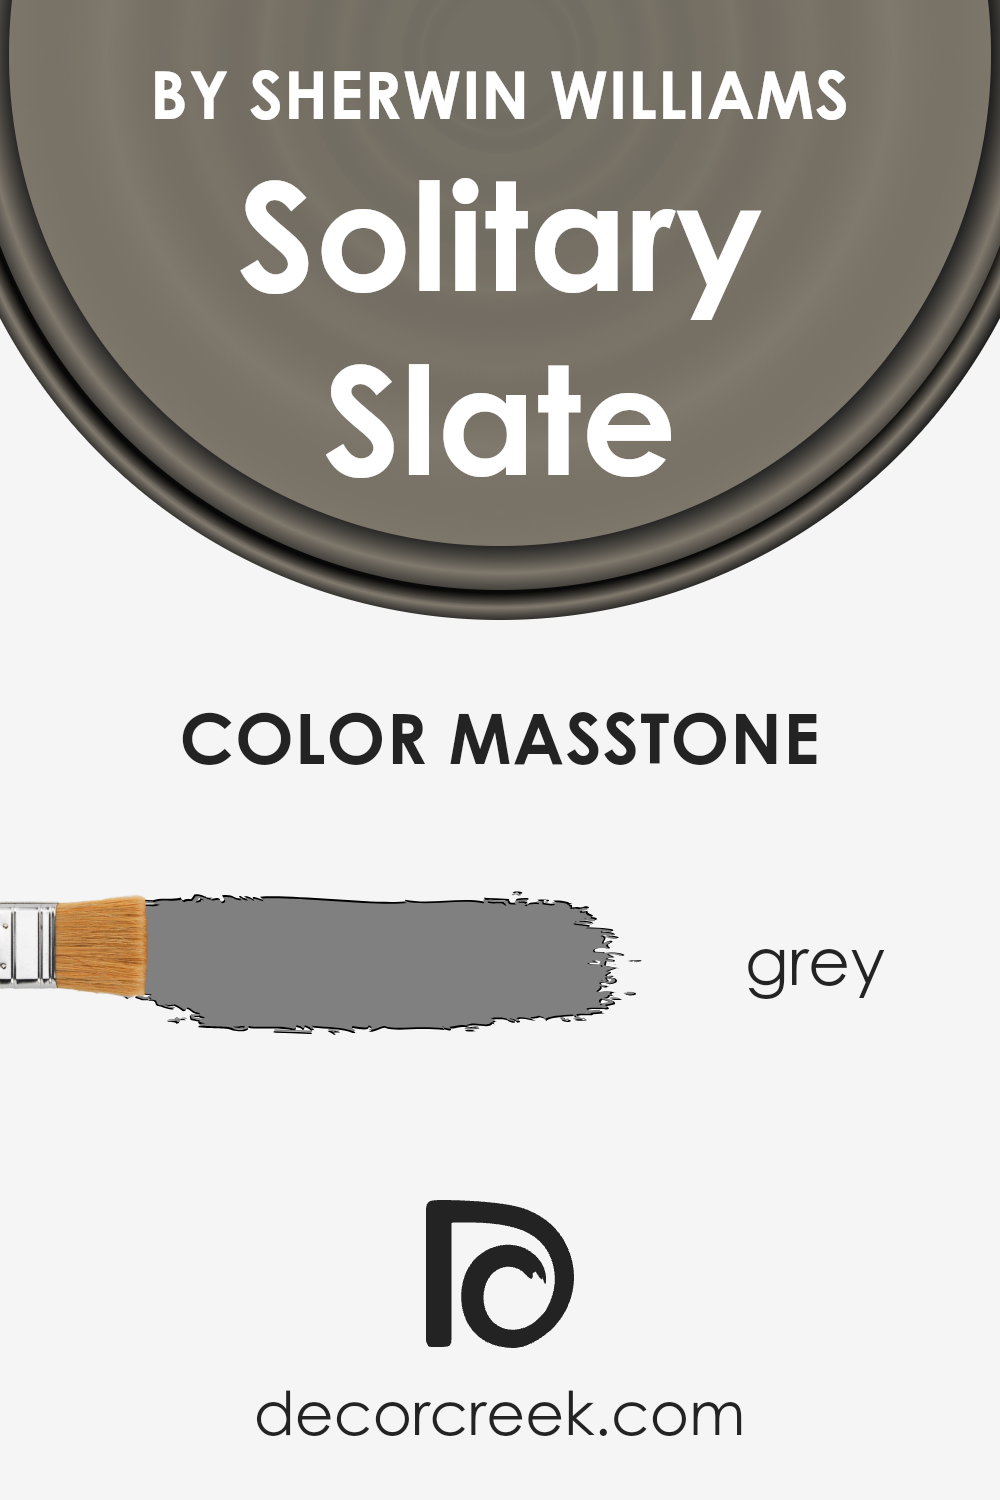 what_is_the_masstone_of_solitary_slate_sw_9598